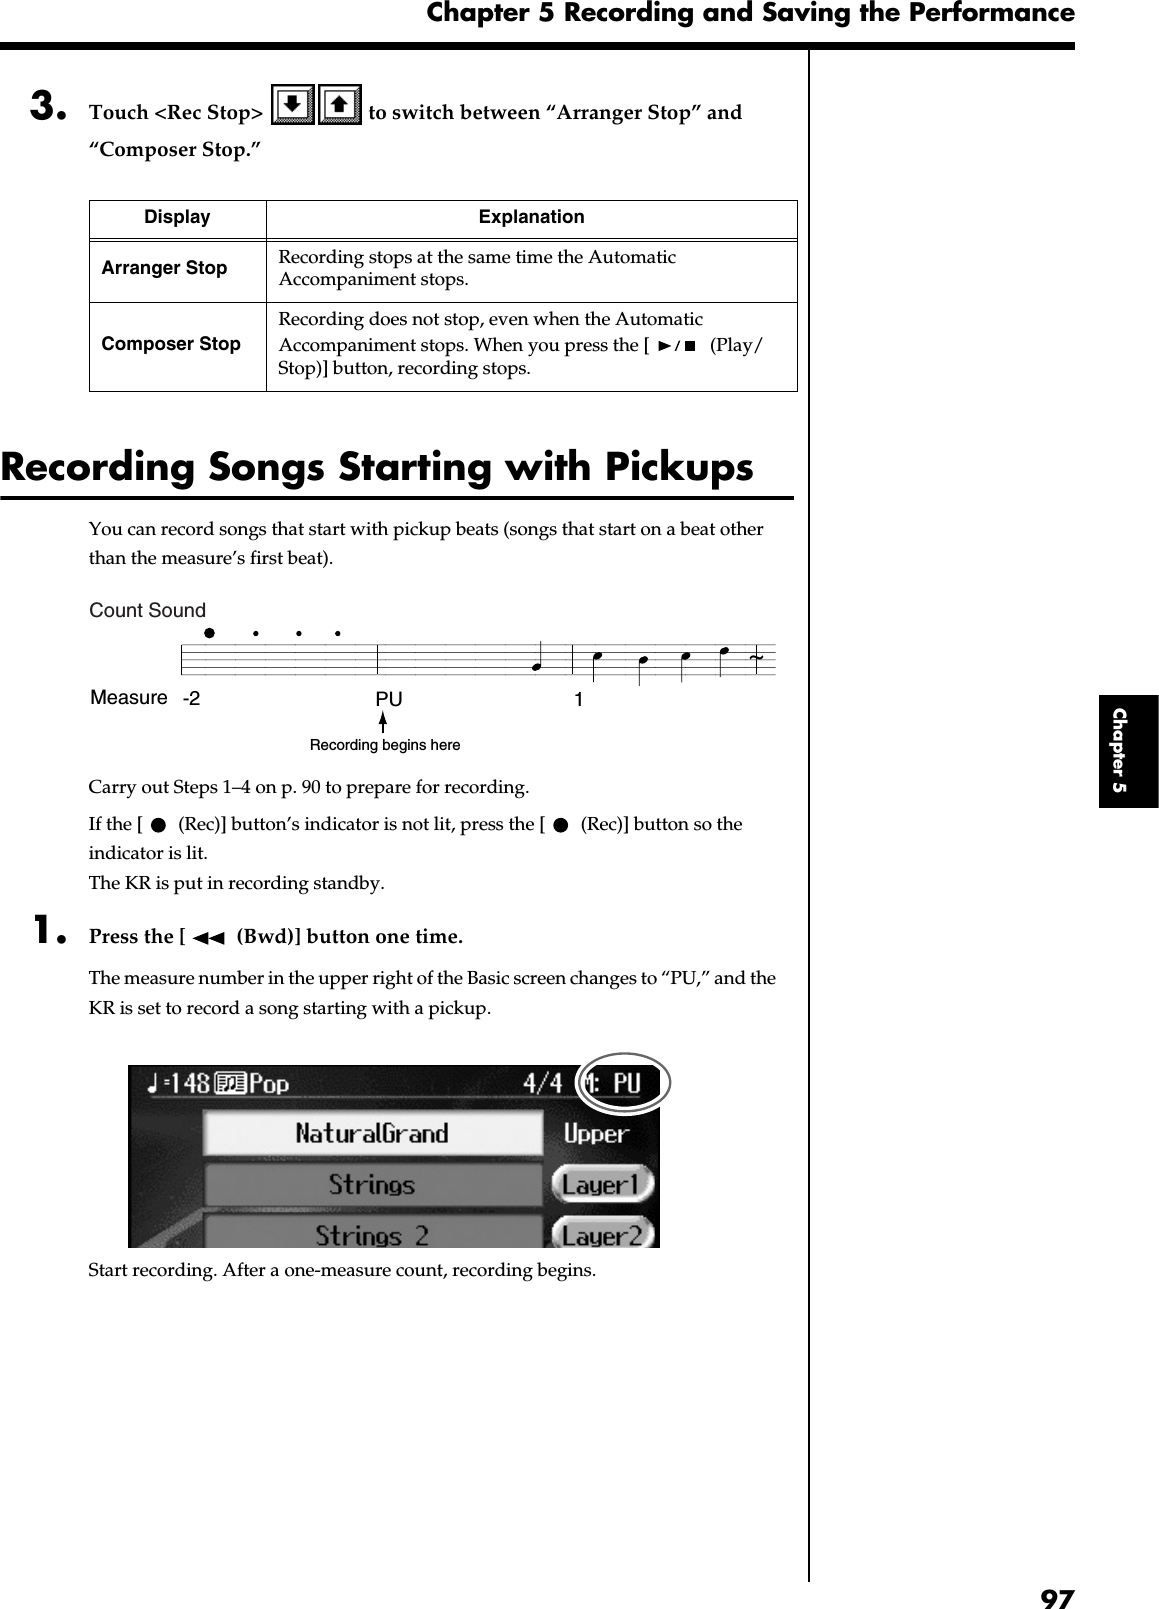 97Chapter 5 Recording and Saving the PerformanceChapter 53. Touch &lt;Rec Stop&gt;   to switch between “Arranger Stop” and “Composer Stop.”Recording Songs Starting with PickupsYou can record songs that start with pickup beats (songs that start on a beat other than the measure’s first beat).fig.PU.eCarry out Steps 1–4 on p. 90 to prepare for recording.If the [  (Rec)] button’s indicator is not lit, press the [  (Rec)] button so the indicator is lit.The KR is put in recording standby.1. Press the [  (Bwd)] button one time.The measure number in the upper right of the Basic screen changes to “PU,” and the KR is set to record a song starting with a pickup.fig.d-pu.eps_60Start recording. After a one-measure count, recording begins.Display ExplanationArranger Stop Recording stops at the same time the Automatic Accompaniment stops.Composer StopRecording does not stop, even when the Automatic Accompaniment stops. When you press the [  (Play/Stop)] button, recording stops.Measure -2 PU 1~Recording begins hereCount Sound